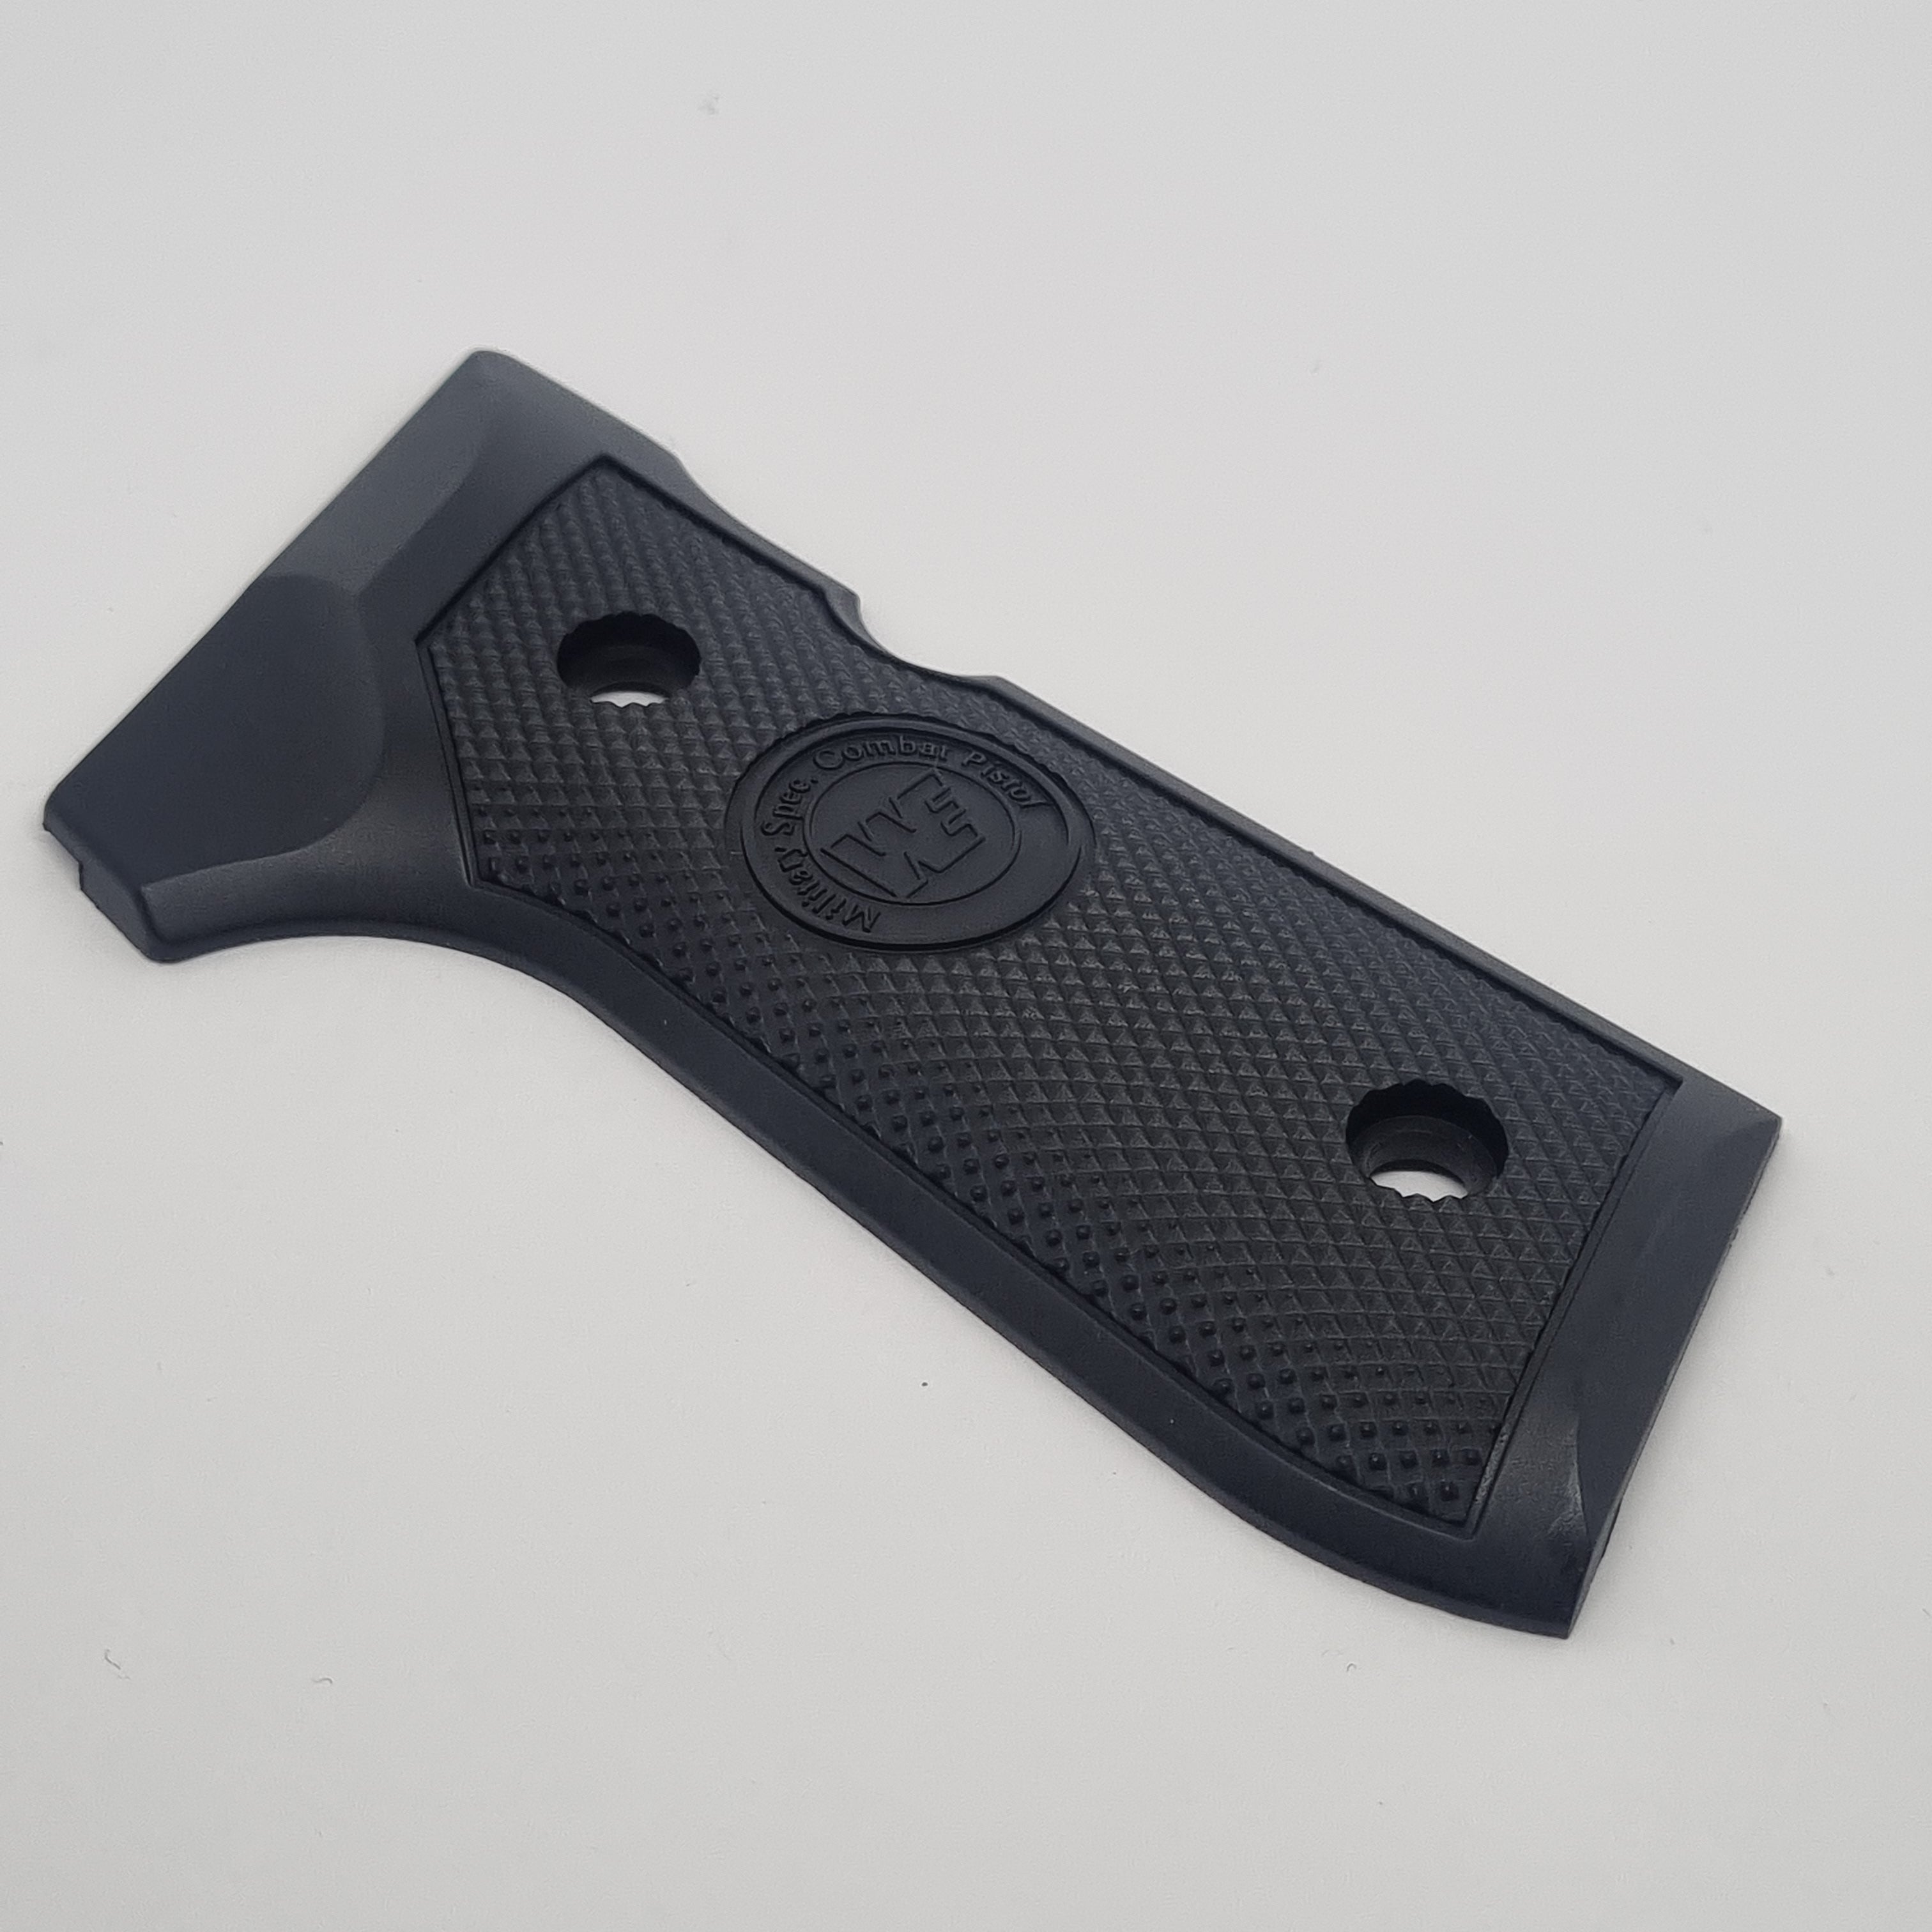 WE M92 Gen1 Replacement part 3 - Grip Cover Right